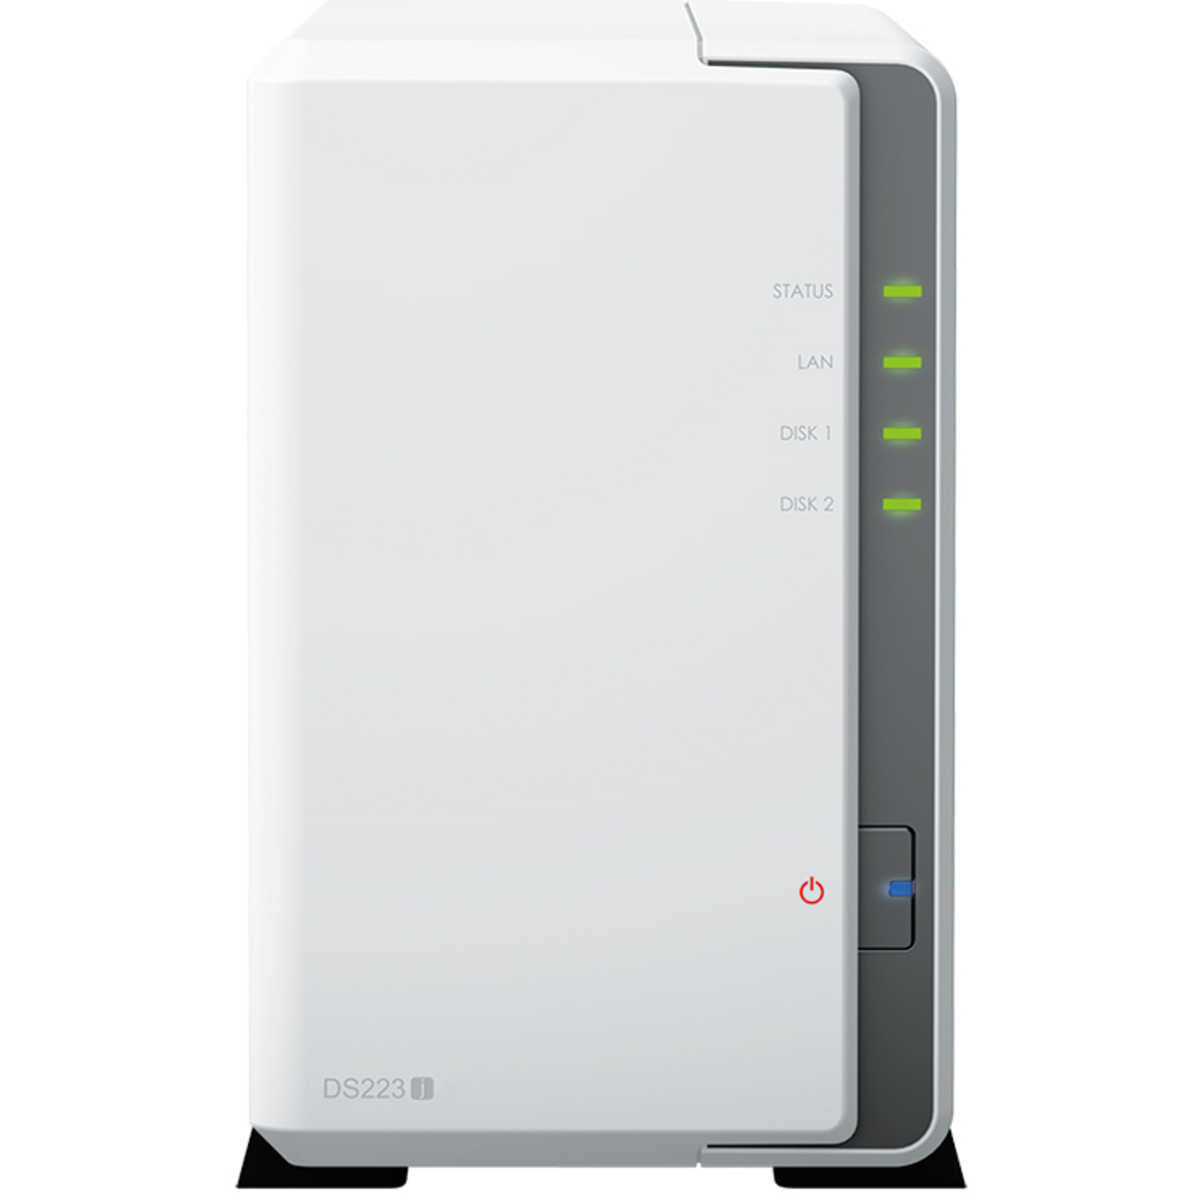 Synology DiskStation DS223j 2tb 2-Bay Desktop Personal / Basic Home / Small Office NAS - Network Attached Storage Device 1x2tb Western Digital Red SA500 WDS200T1R0A 2.5 560/530MB/s SATA 6Gb/s SSD NAS Class Drives Installed - Burn-In Tested DiskStation DS223j